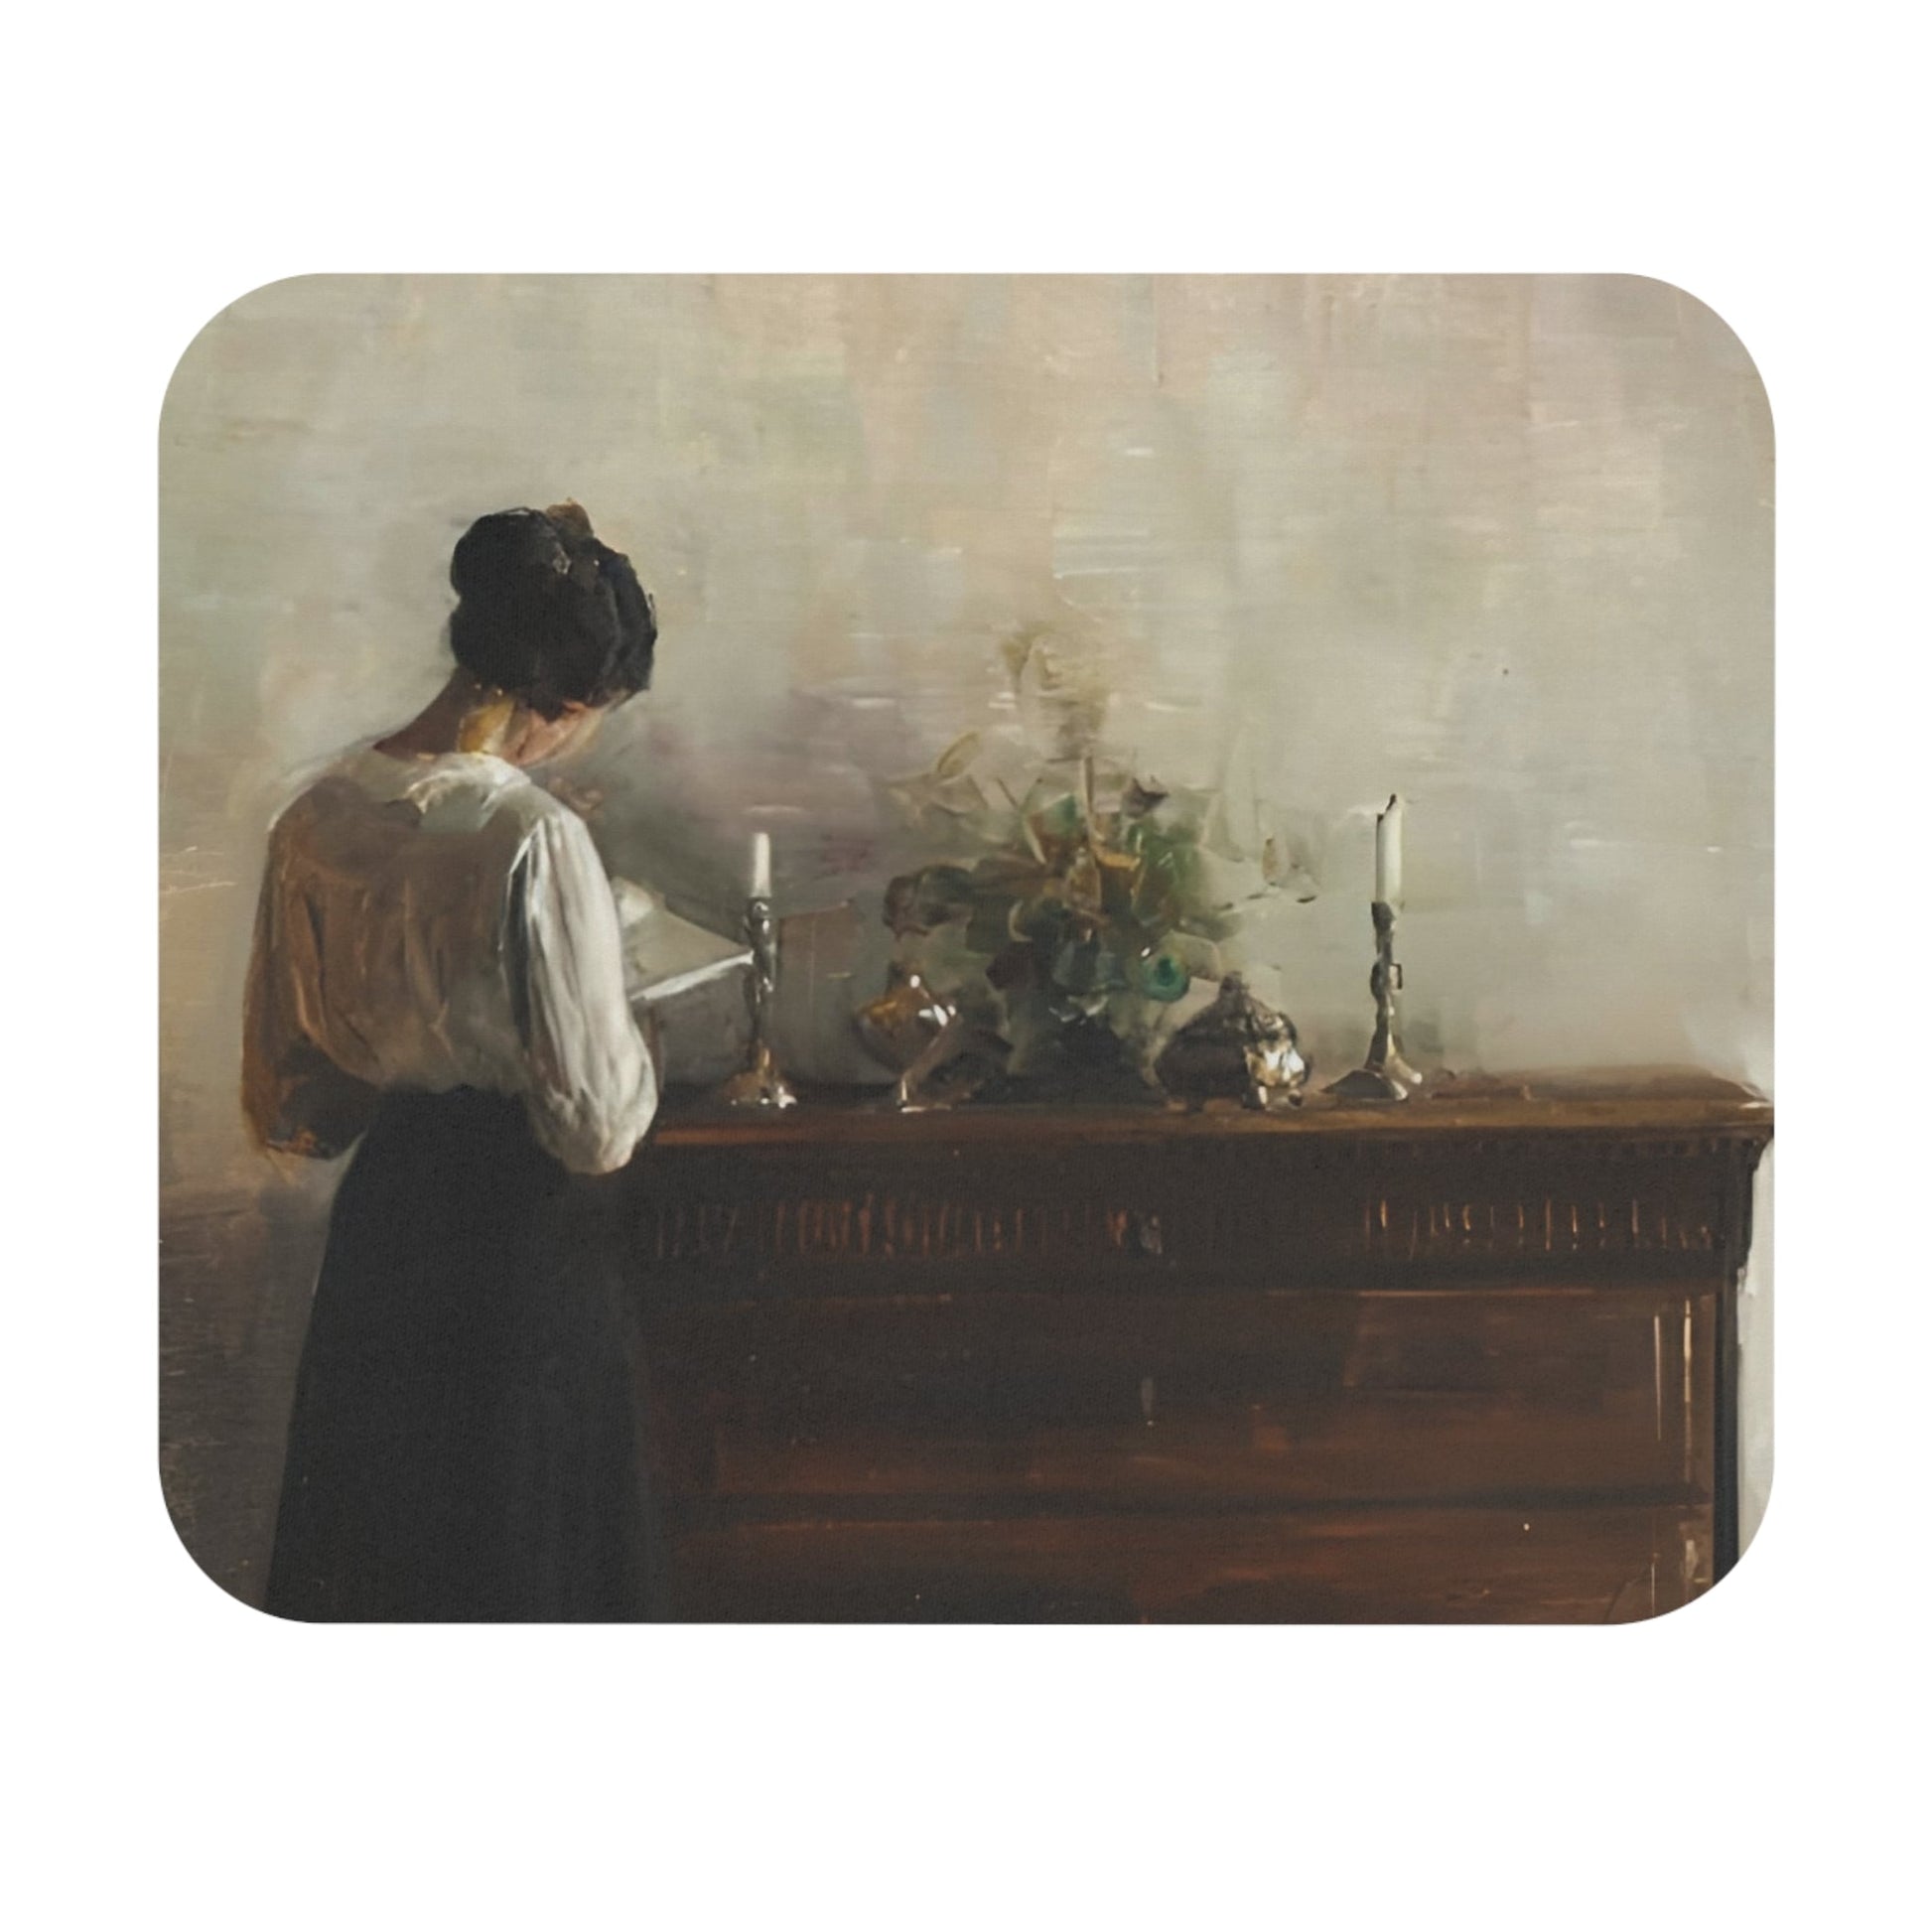 Victorian Aesthetic Mouse Pad featuring a woman reading design, perfect for desk and office decor.